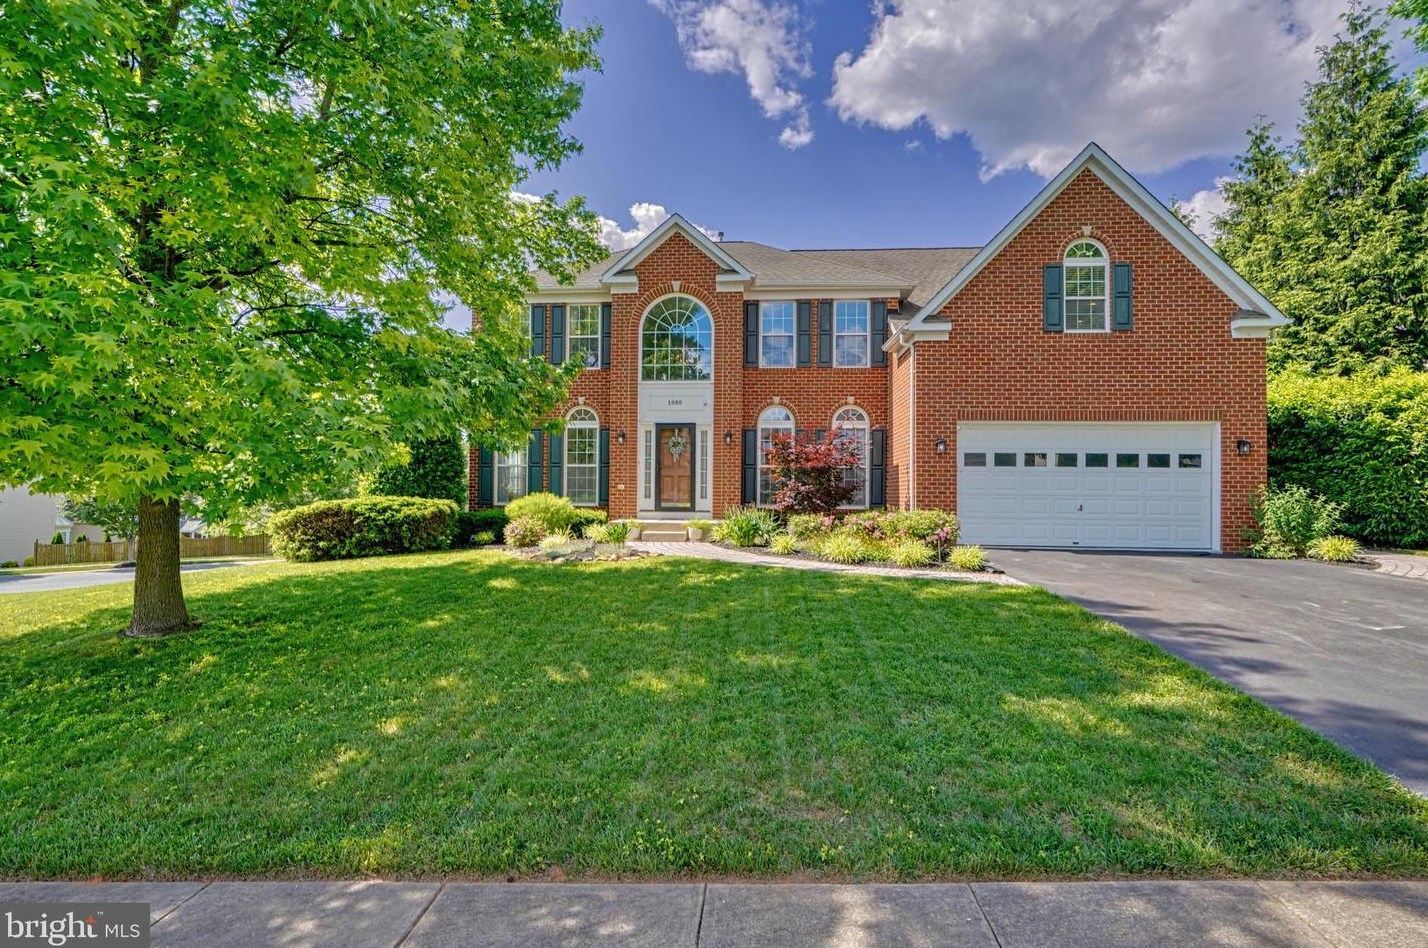 1080 Lillygate Ln, Bel Air, MD 21014